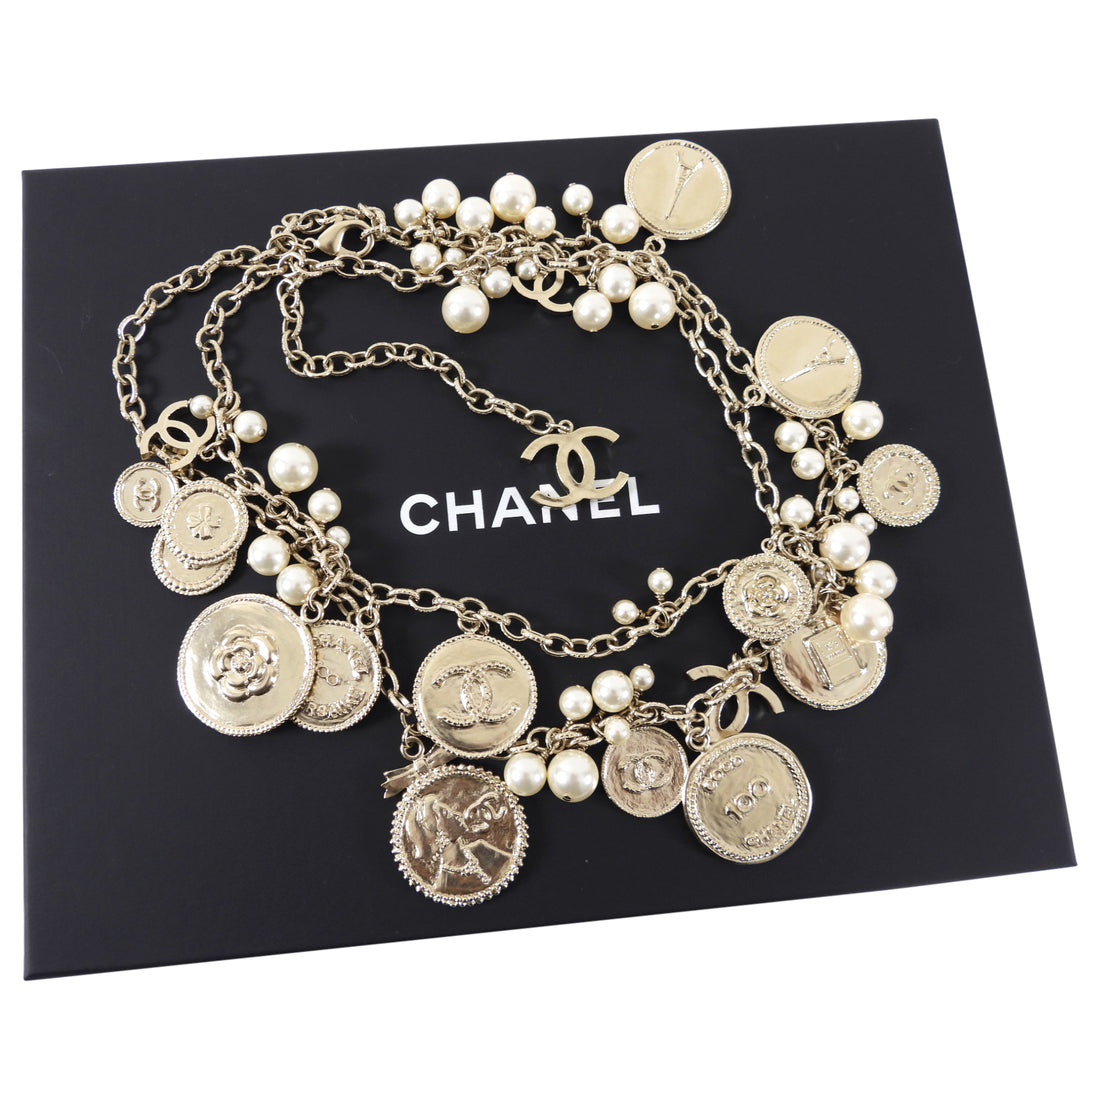 Chanel Vintage 31 Rue Cambon Coin Pendant Necklace  Rent Chanel jewelry  for 55month